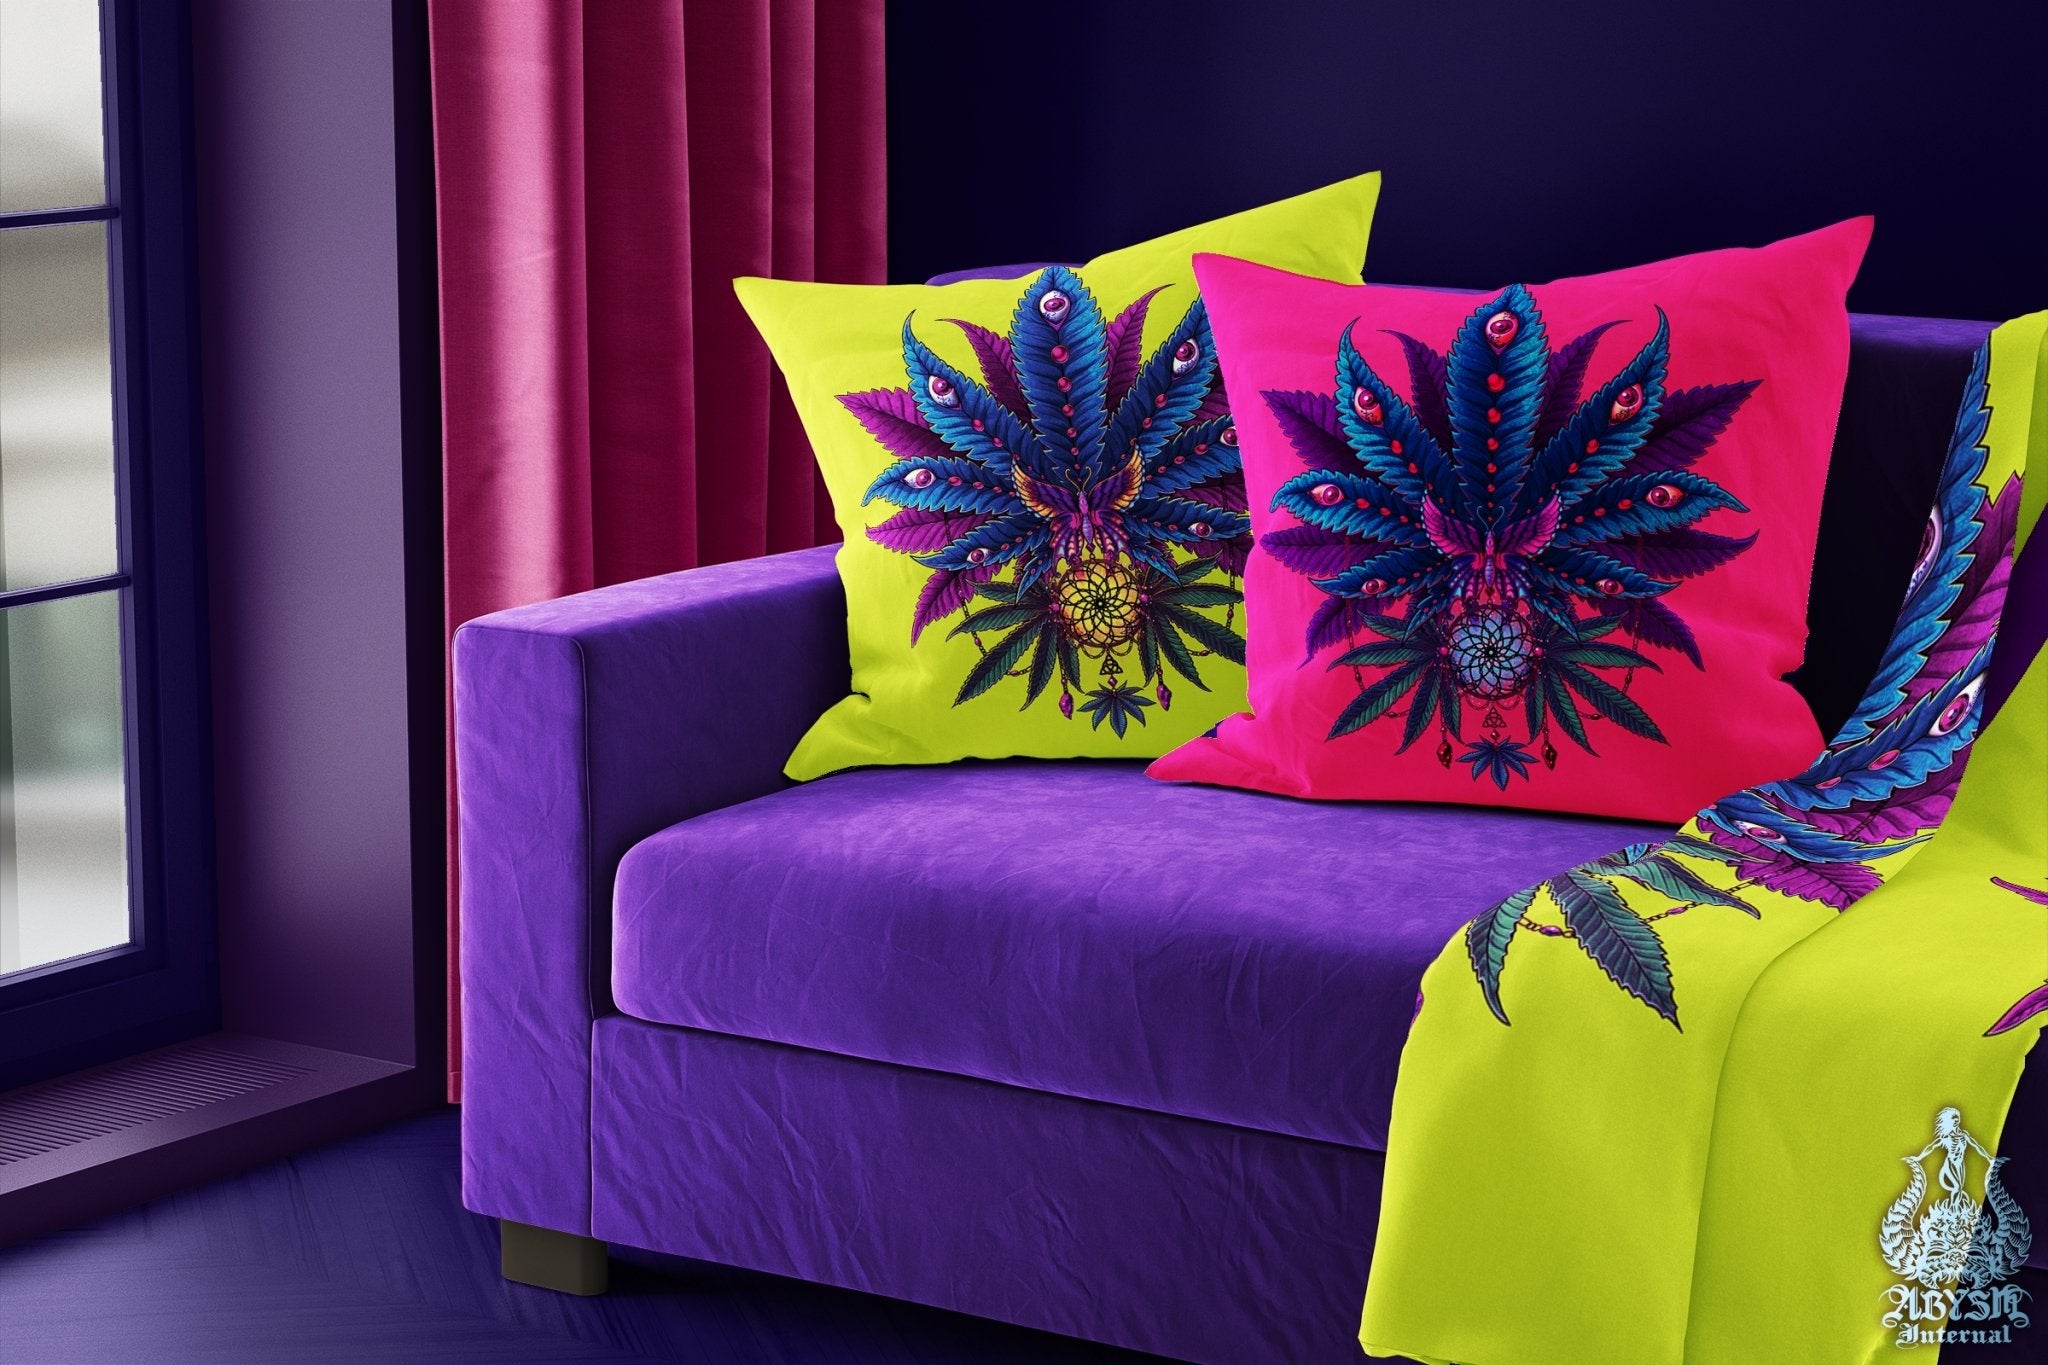 Weed Throw Pillow, Cannabis Shop Decor, Vaporwave Decorative Accent Cushion, Retrowave 80s Room Decor, Synthwave and Psychedelic 420 Art Print - Neon II - Abysm Internal